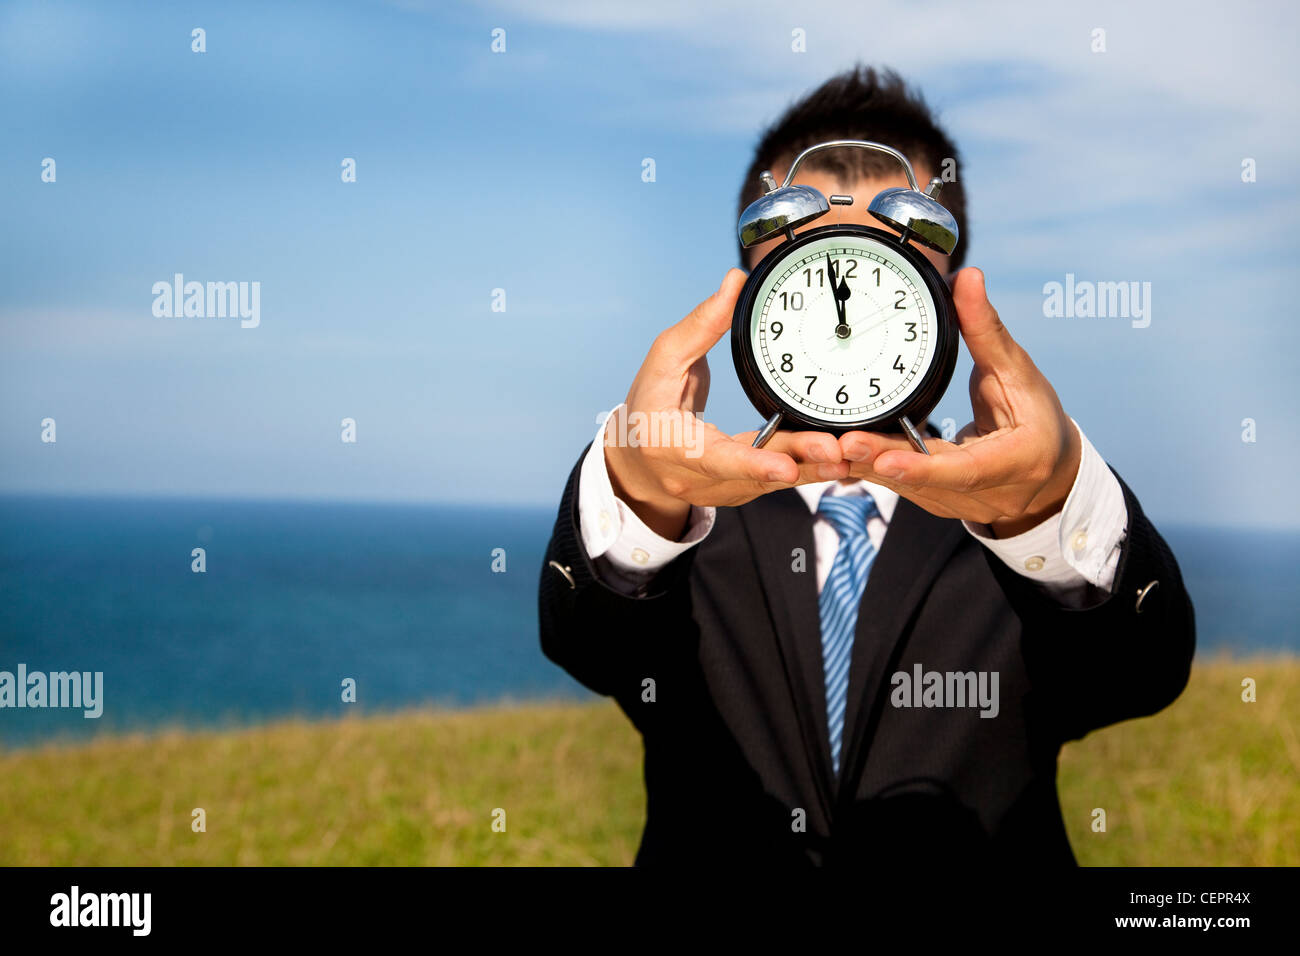 man holding clock and cover his face Stock Photo